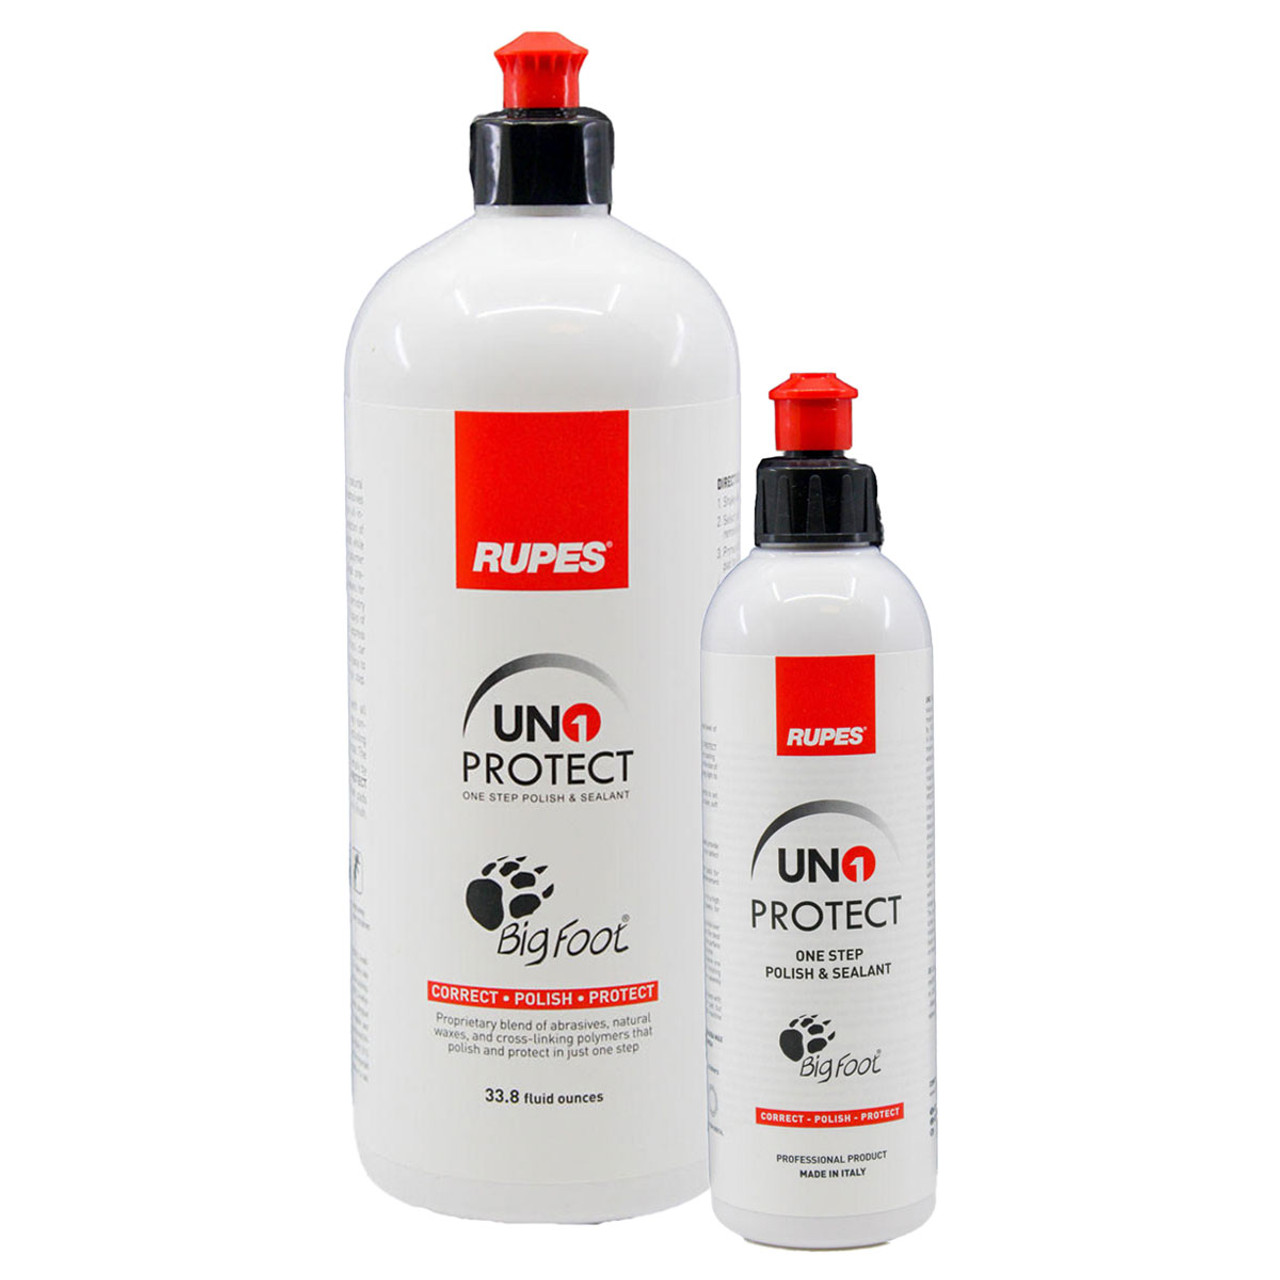 RUPES UNO PROTECT - ALL-IN-ONE POLISH & SEALANT – Drive Auto Appearance